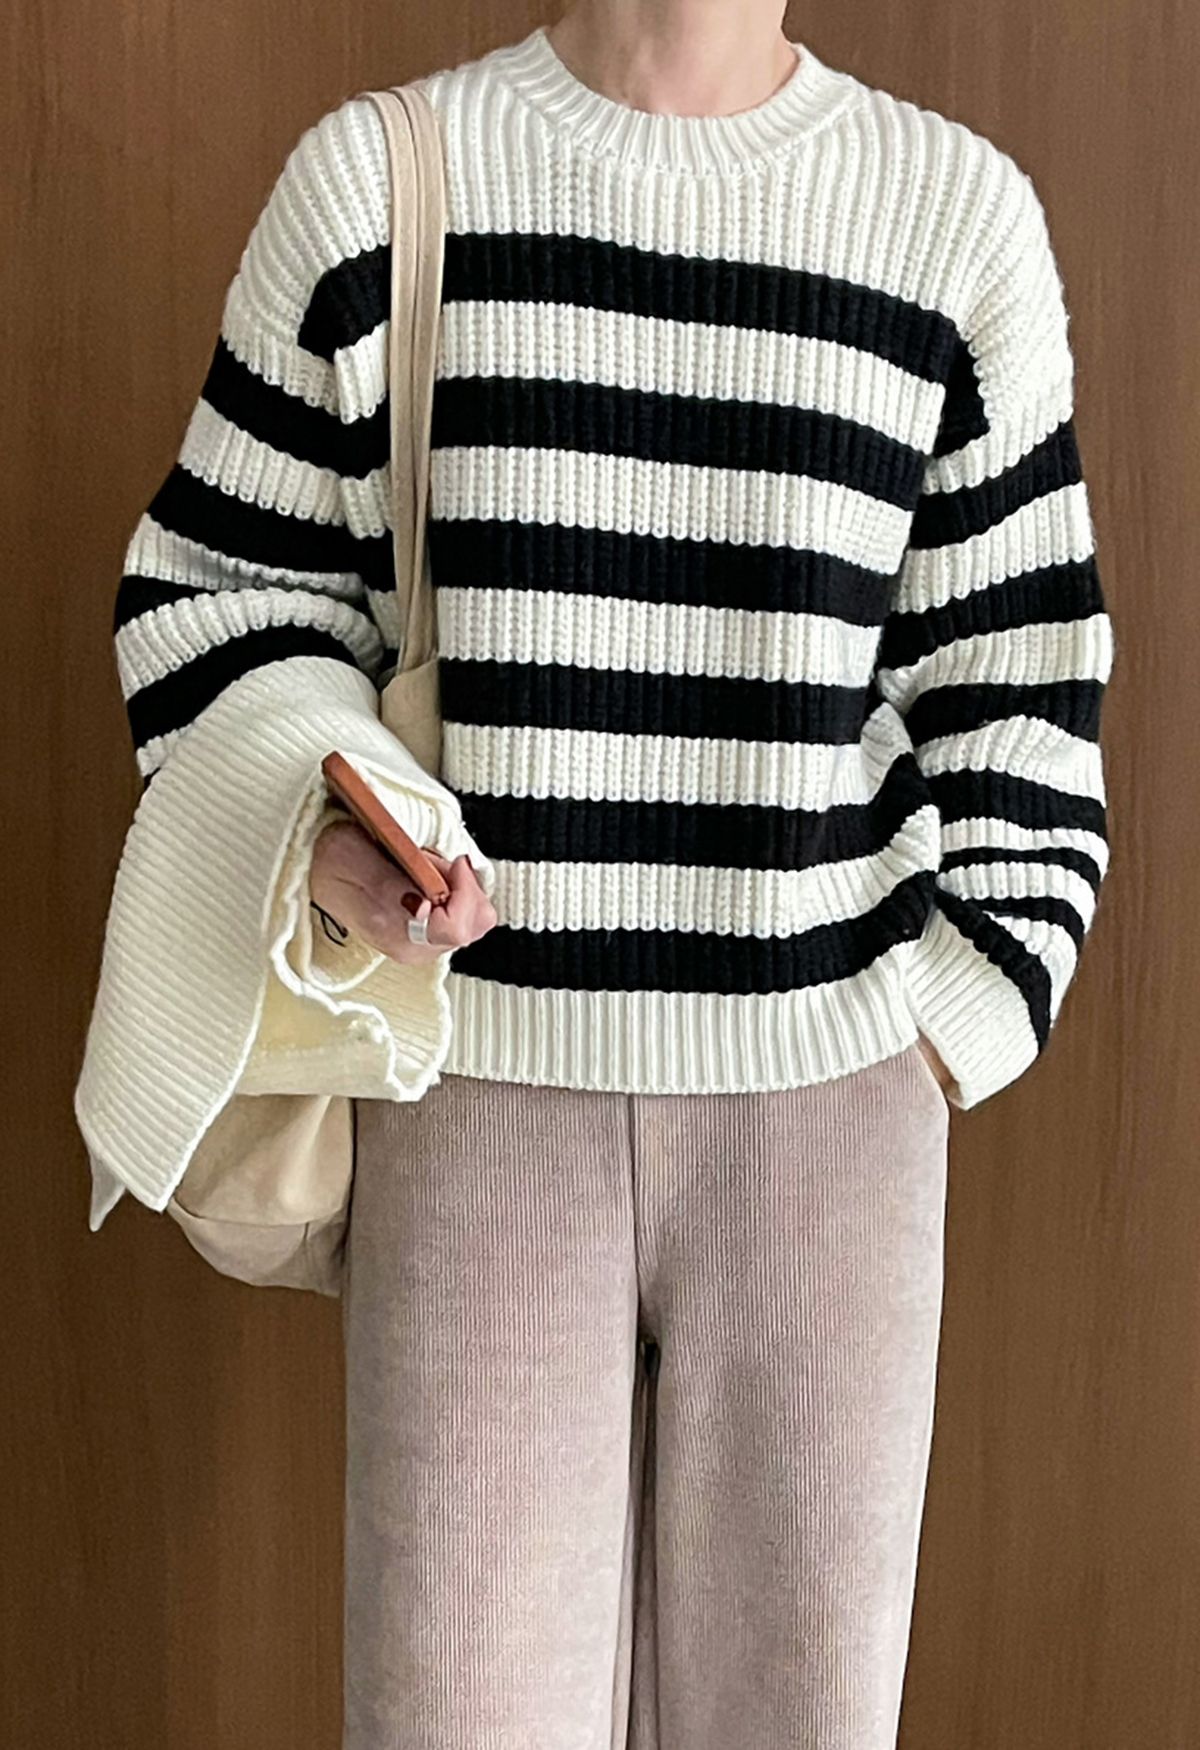 Detachable Scarf Striped Knit Sweater in Ivory